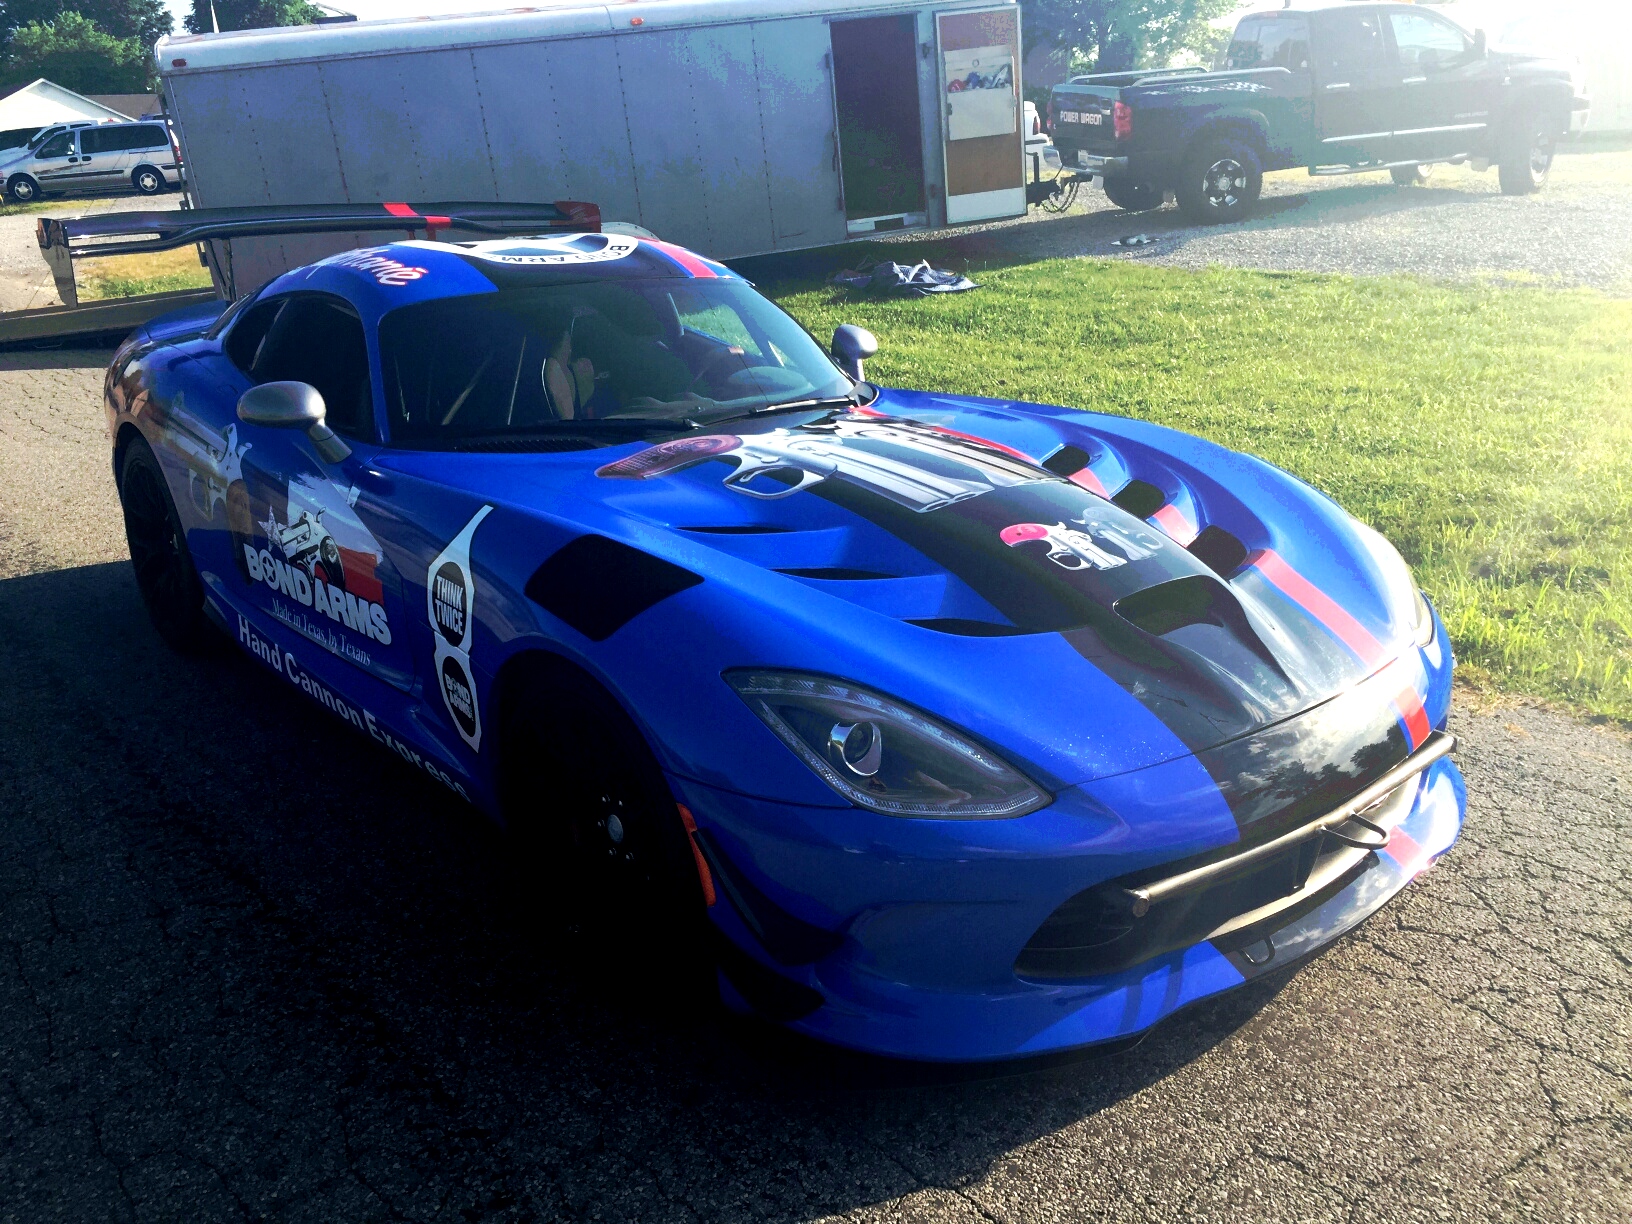 2016 Dodge Viper ACR, Car #8 In Pike Peaks 100th 'Race To The Clouds' Driven By Stephanie Reaves, Sponsored By BondArms.com